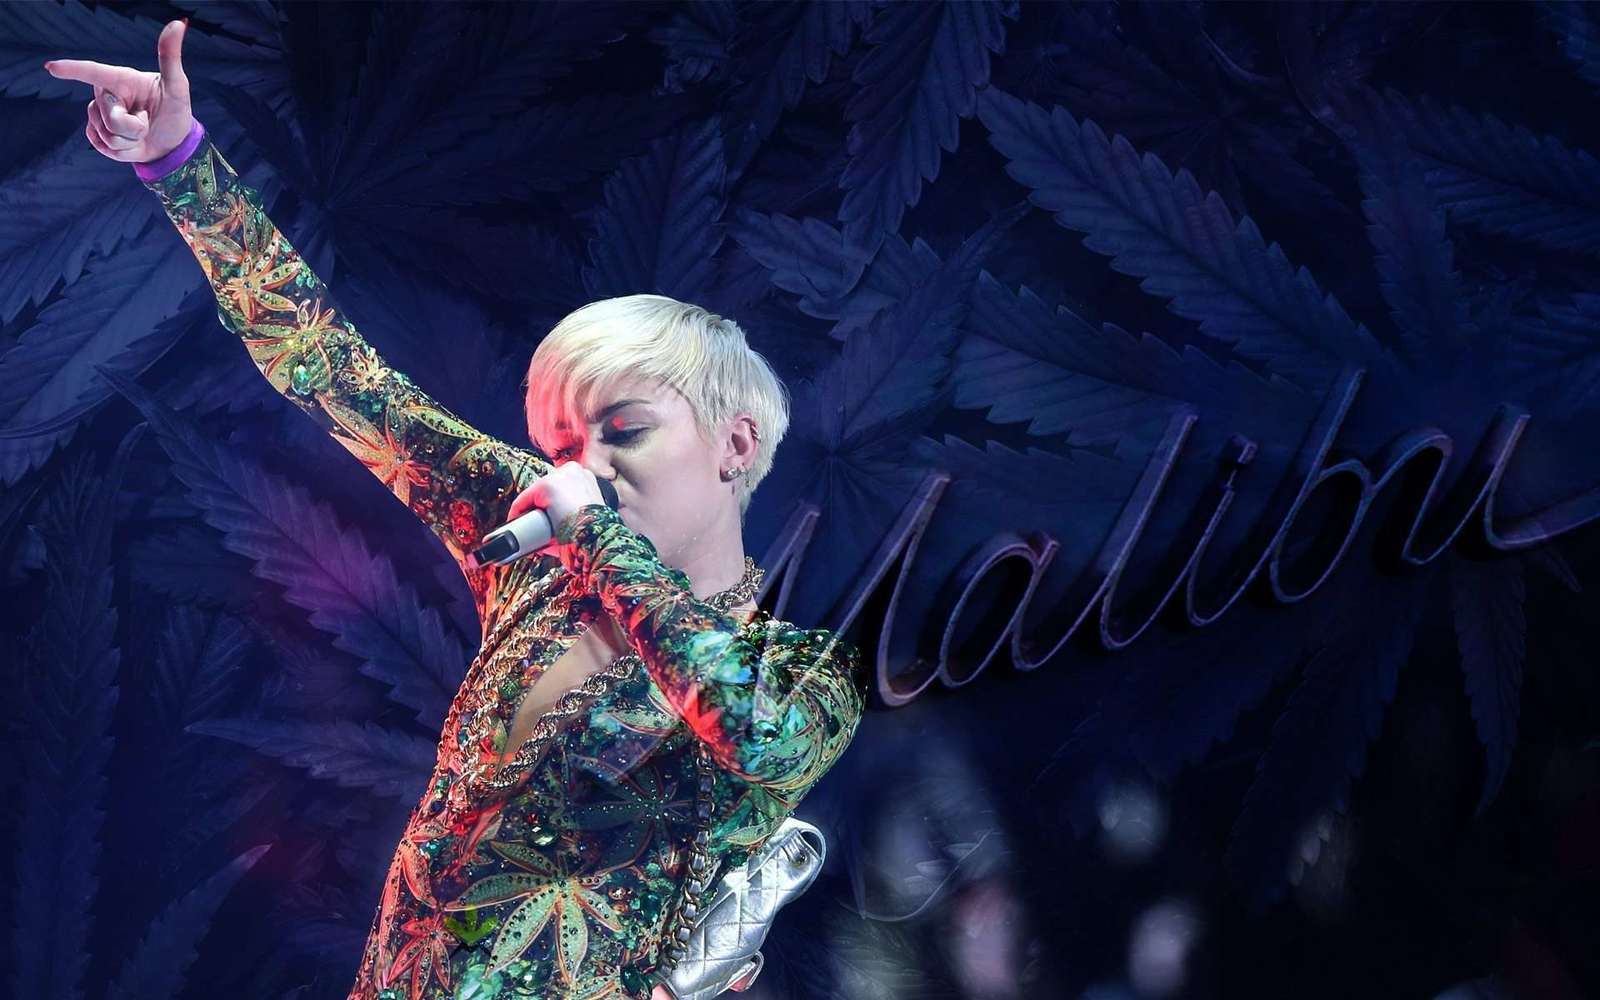 Miley Cyrus Should Go Back to Weed Because "Malibu" Blows